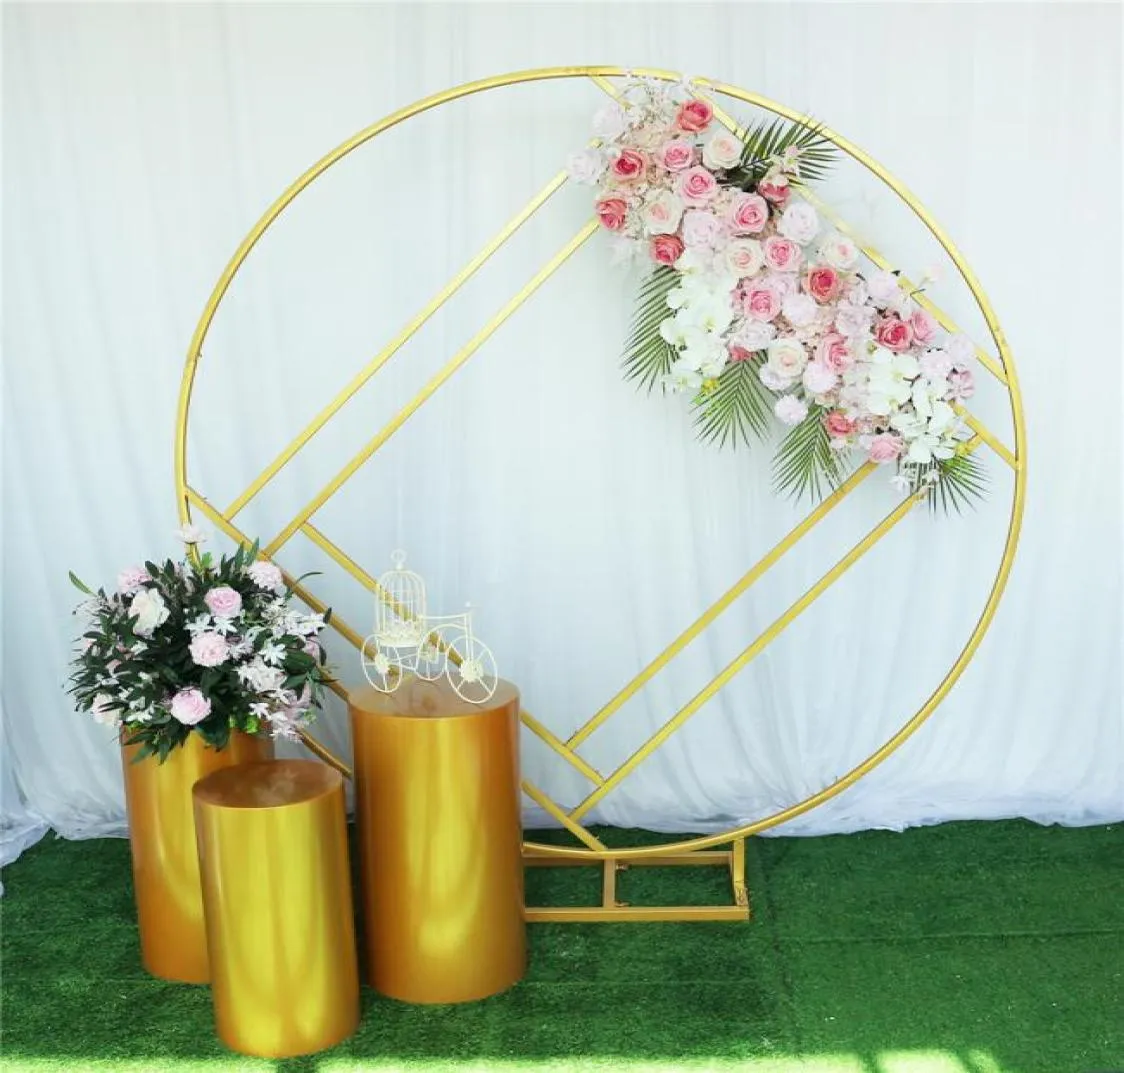 New Diamond Wedding Arch Mariage Backdrop Wrought Iron Creative Ring Geometric Frame Stand Screen Stage Background Decoration8077486